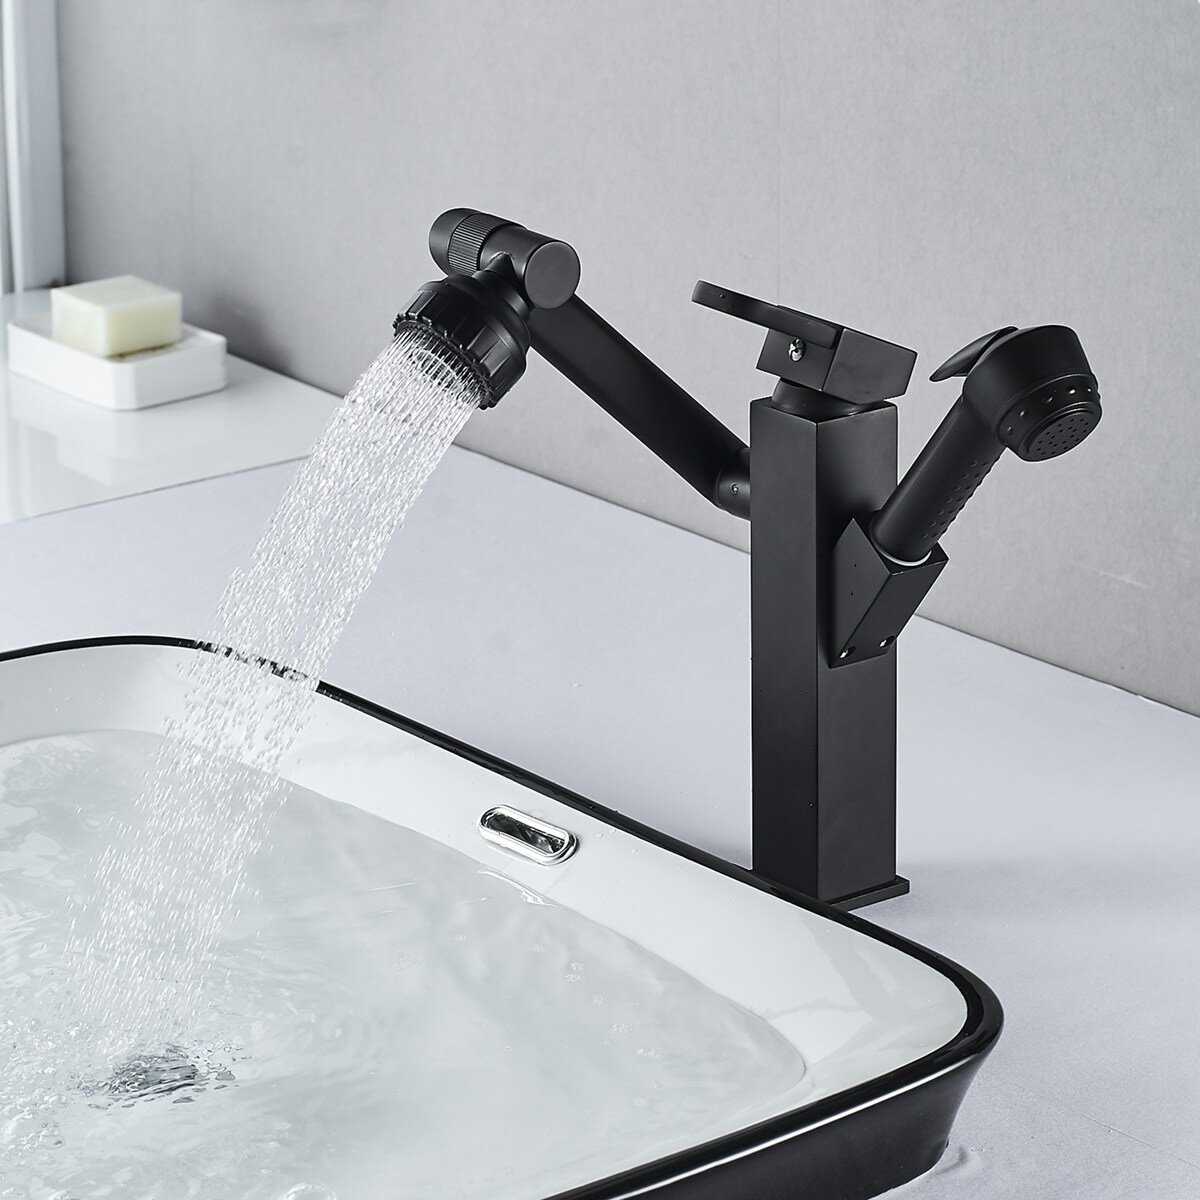 Bathroom Faucet Pull-Out Sink Faucet Adjustable and Rotatable Faucet with Sprayer Two Flow Modes Modern Lavatory Basin F